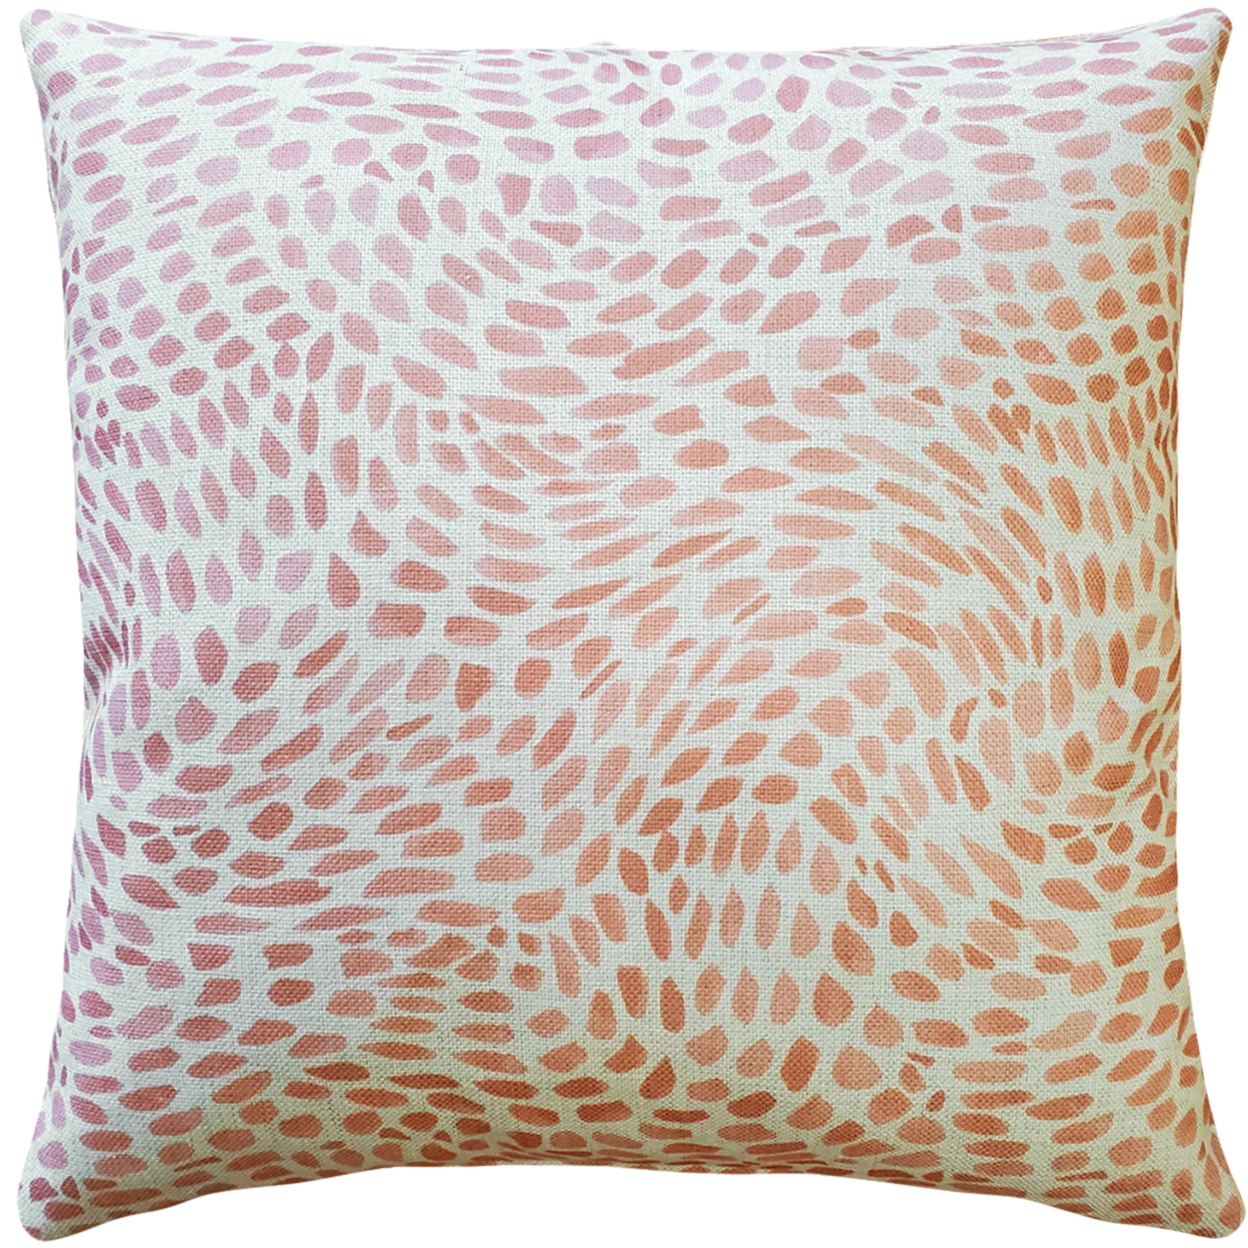 Matisse Dots Coral Pink Throw Pillow 19x19 Inches Square, Complete Pillow With Polyfill Pillow Insert